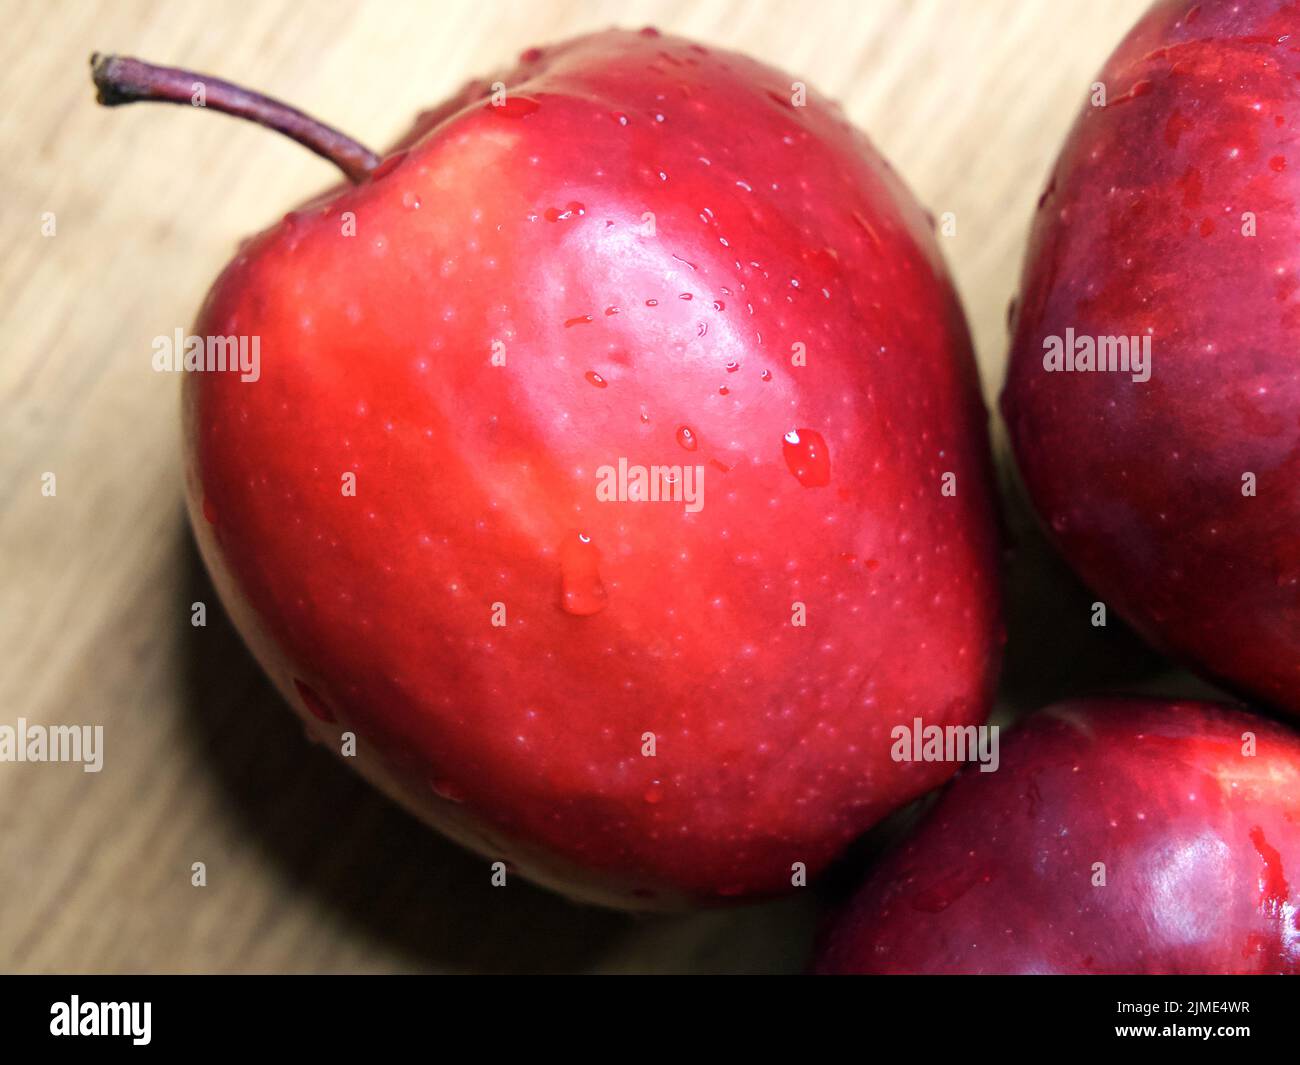 A large red apple of the Red Chief variety. Stock Photo